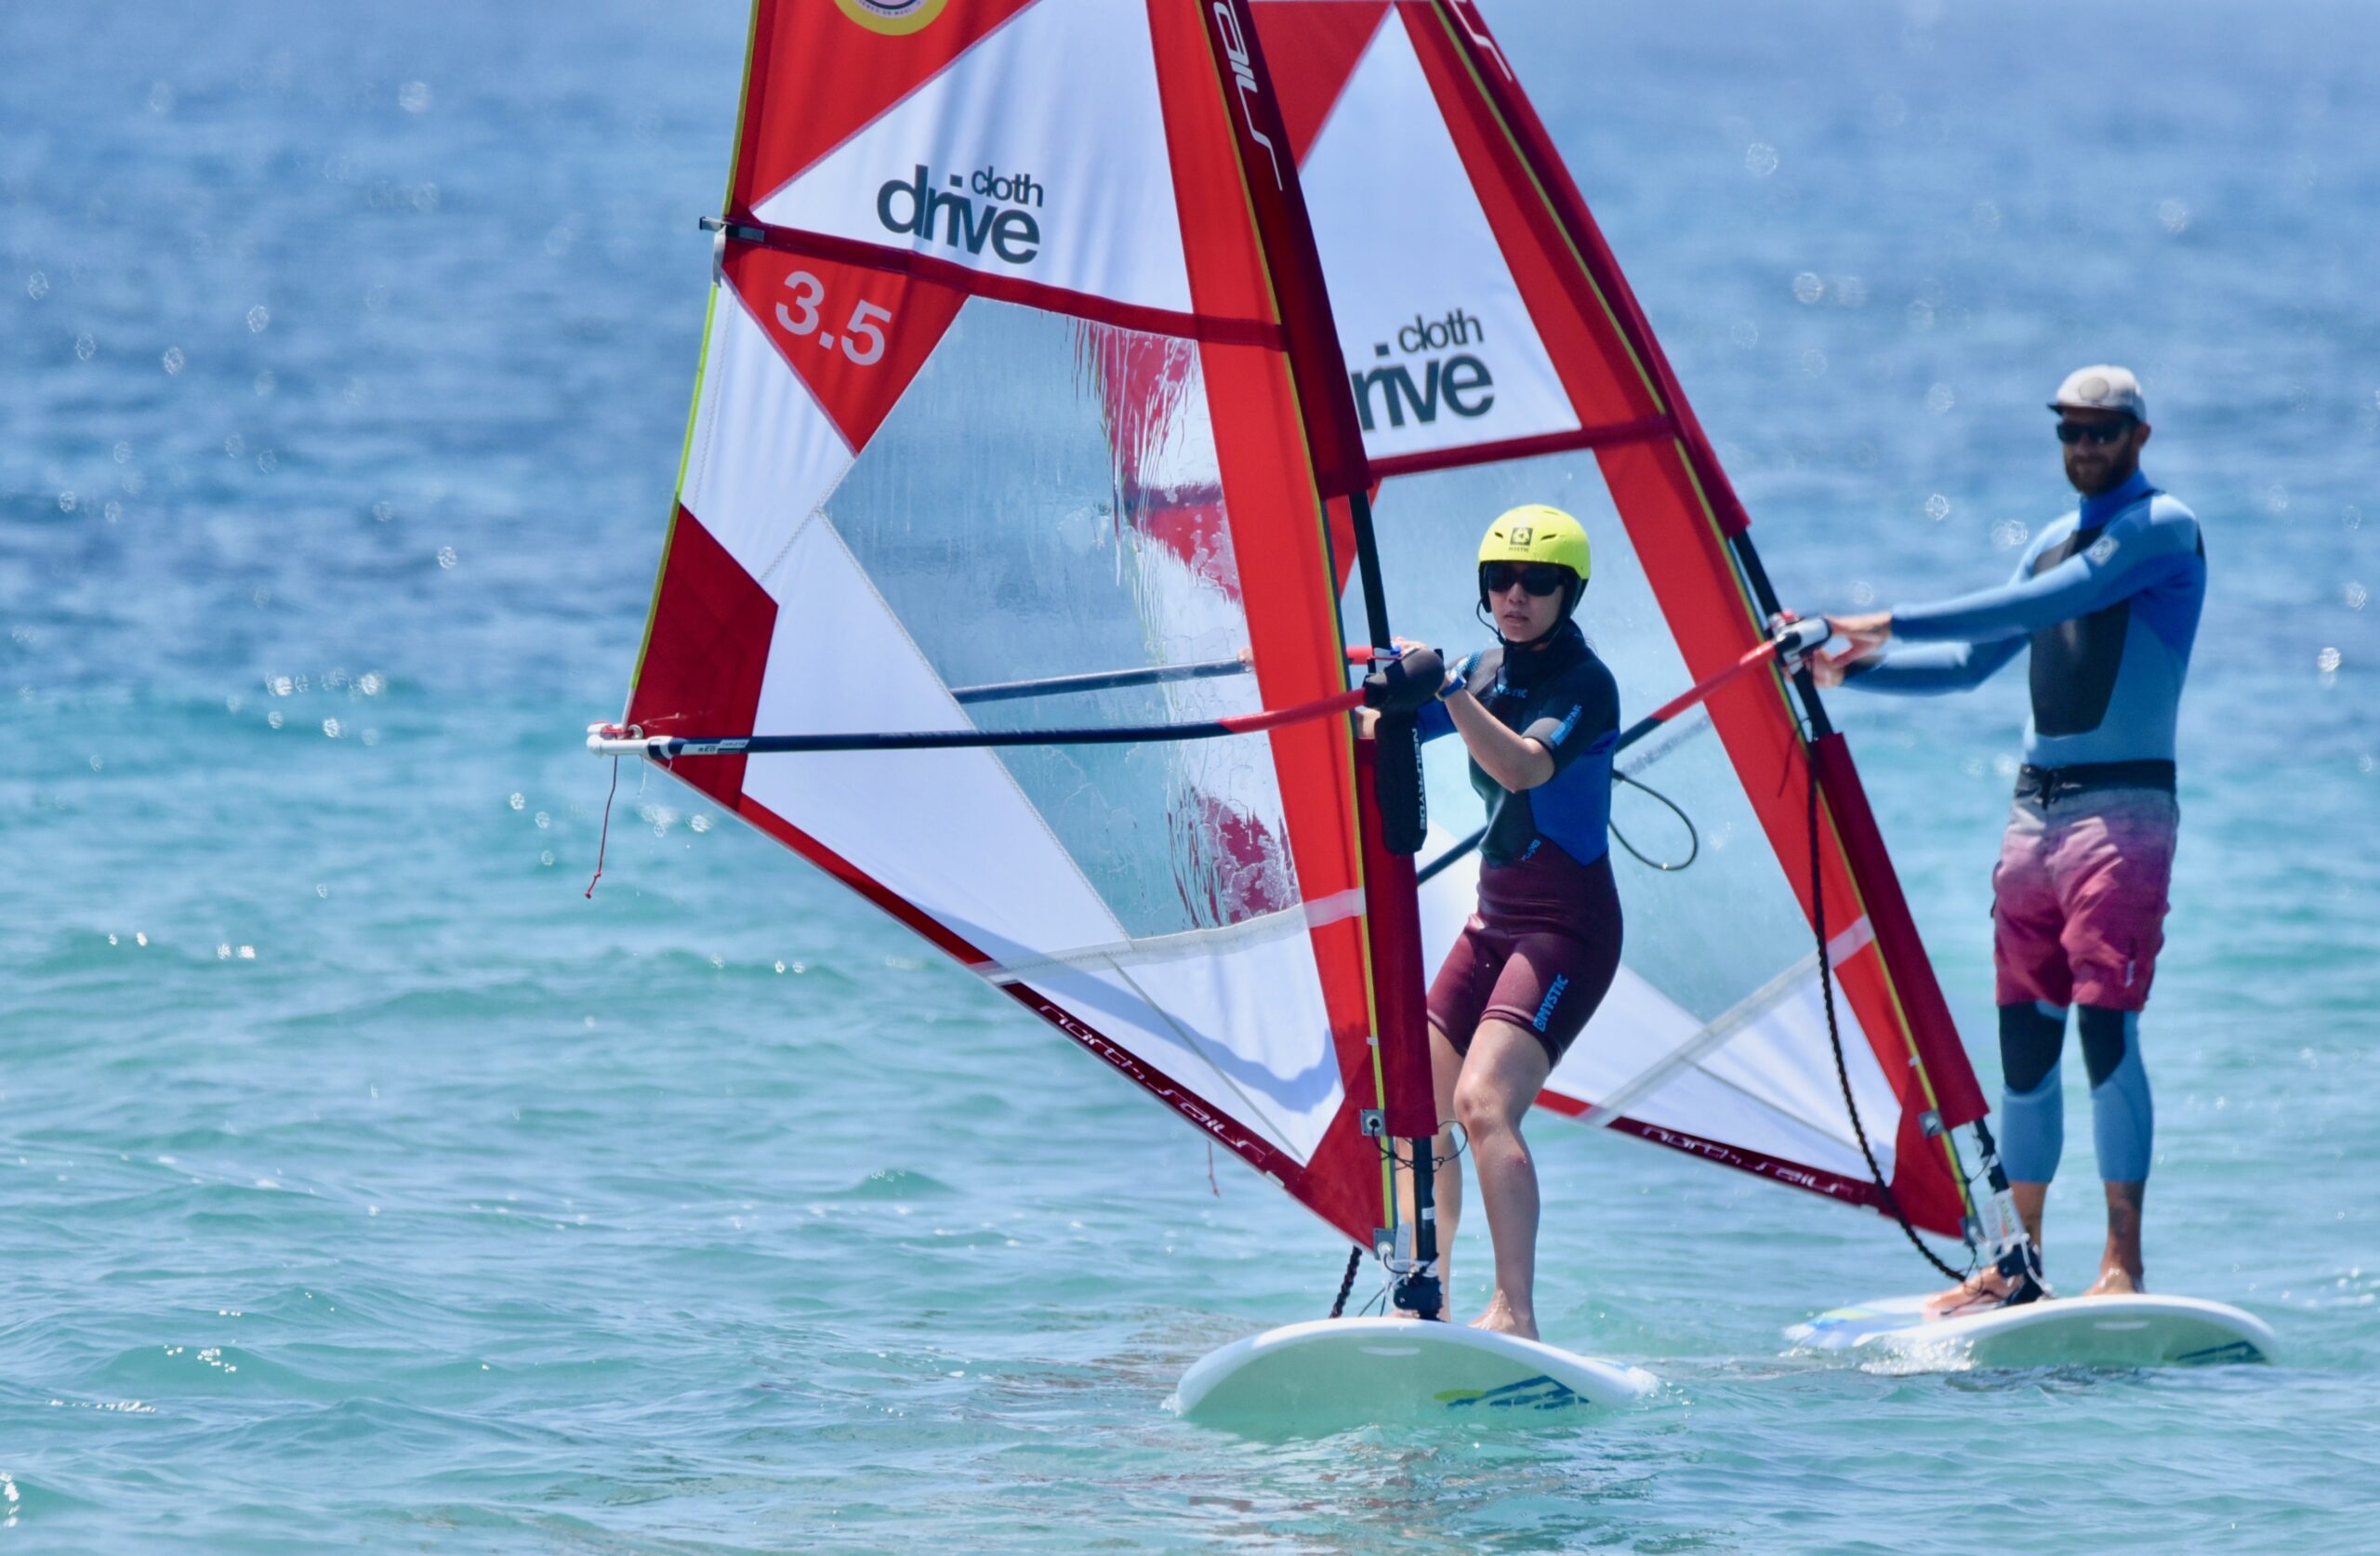 Learn with windsurf with us!